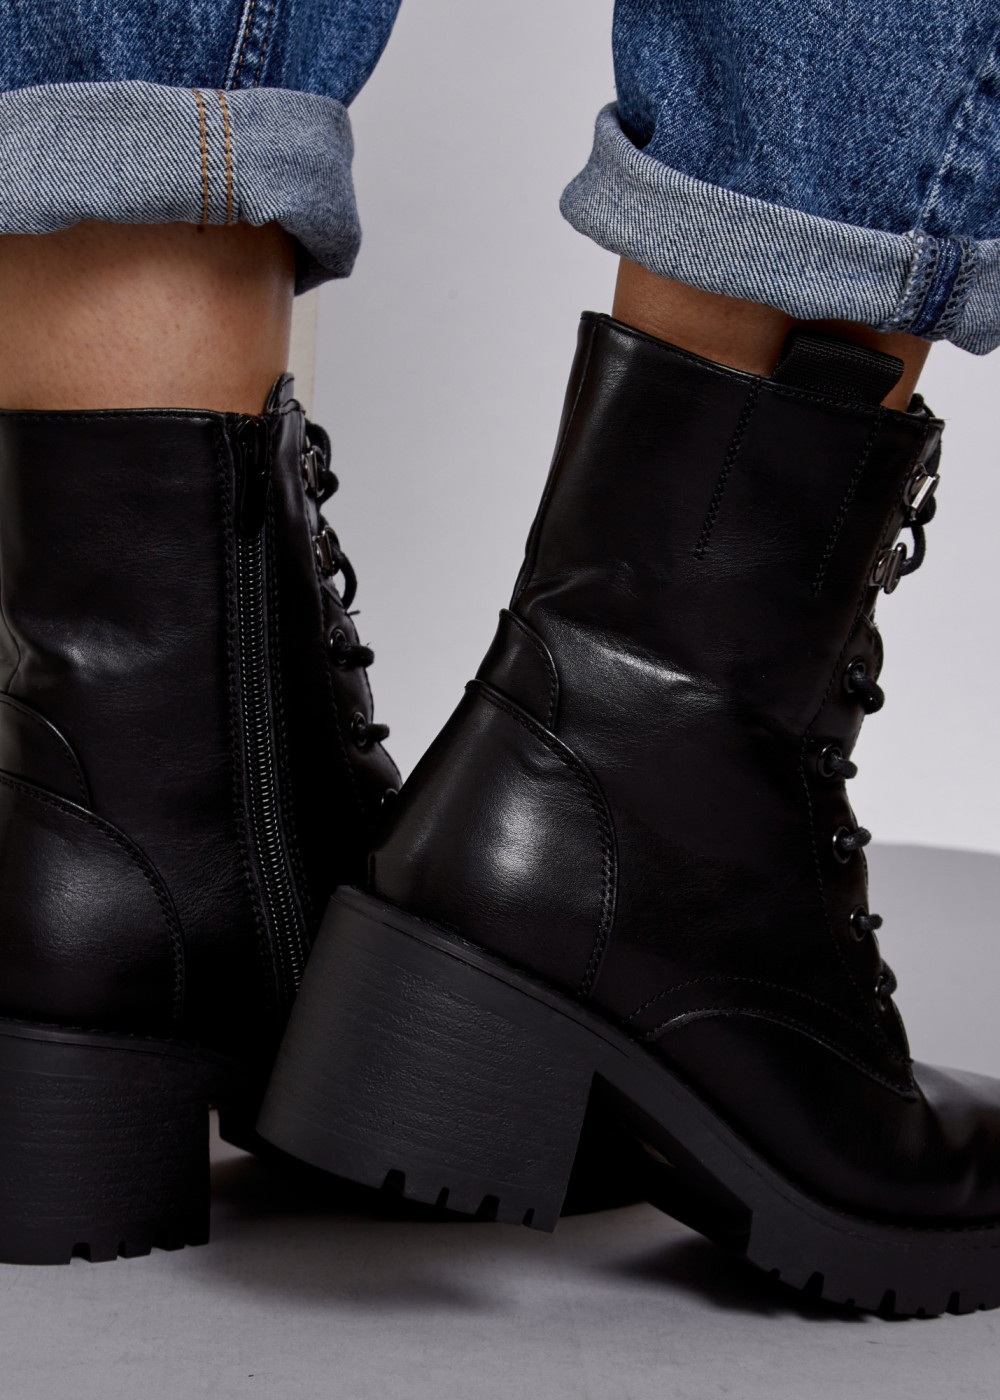 Black lace up heeled ankle boots 2